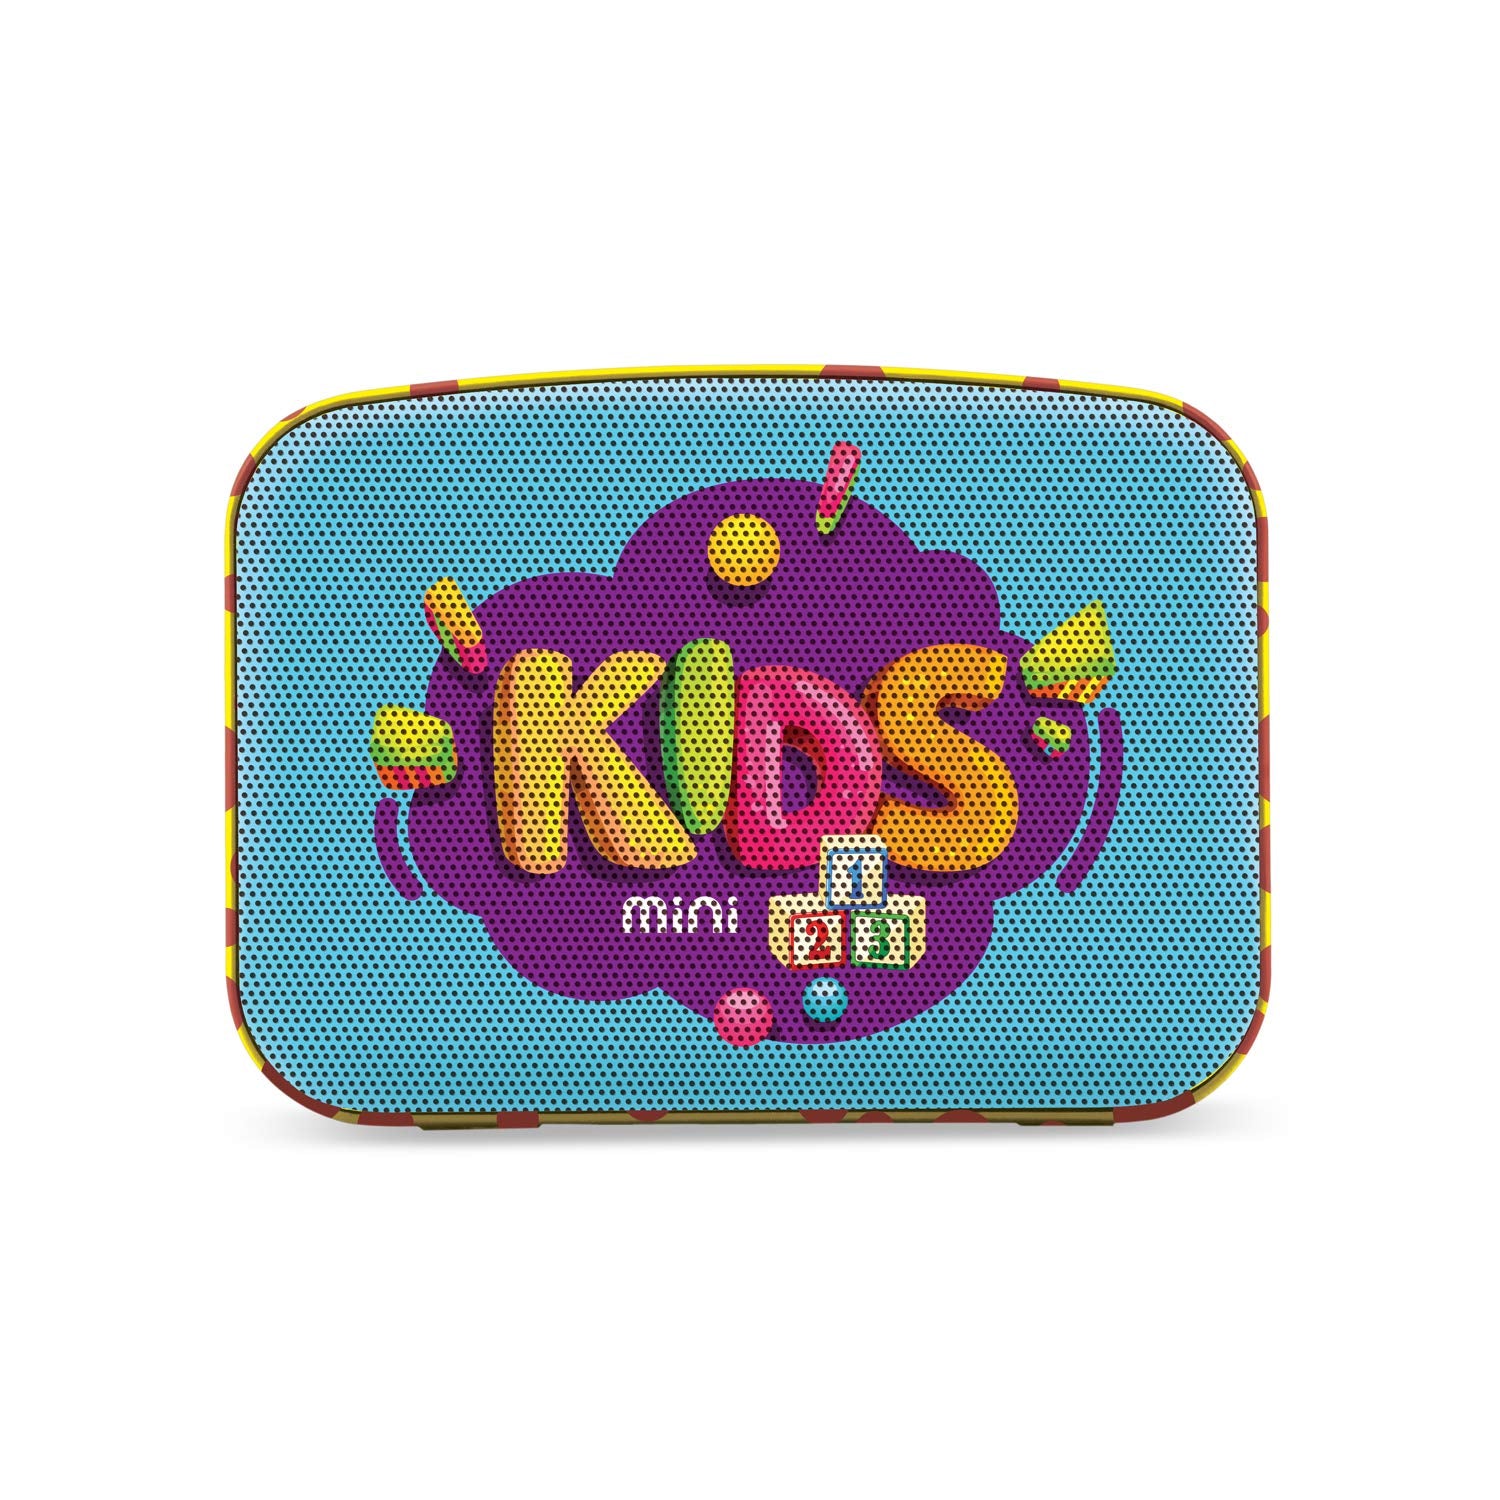 Carvaan Saregama Mini Kids - Pre-Loaded With Stories, Rhymes, Learnings, Man